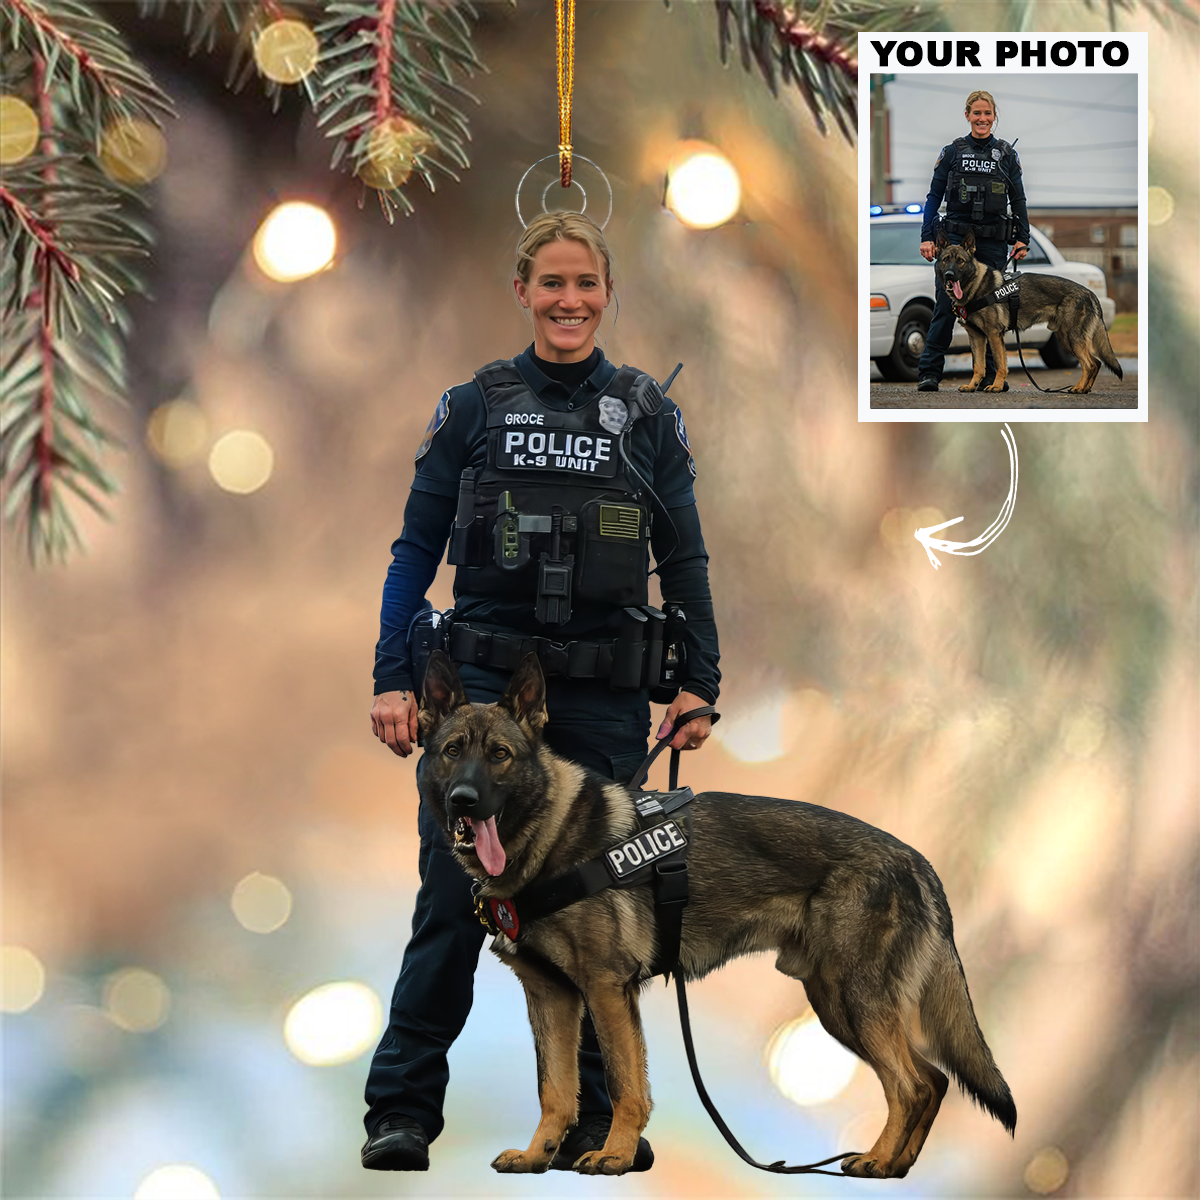 Police Customized Photo Ornament - Personalized Custom Photo Mica Ornament - Christmas Gift For Police, Family Members